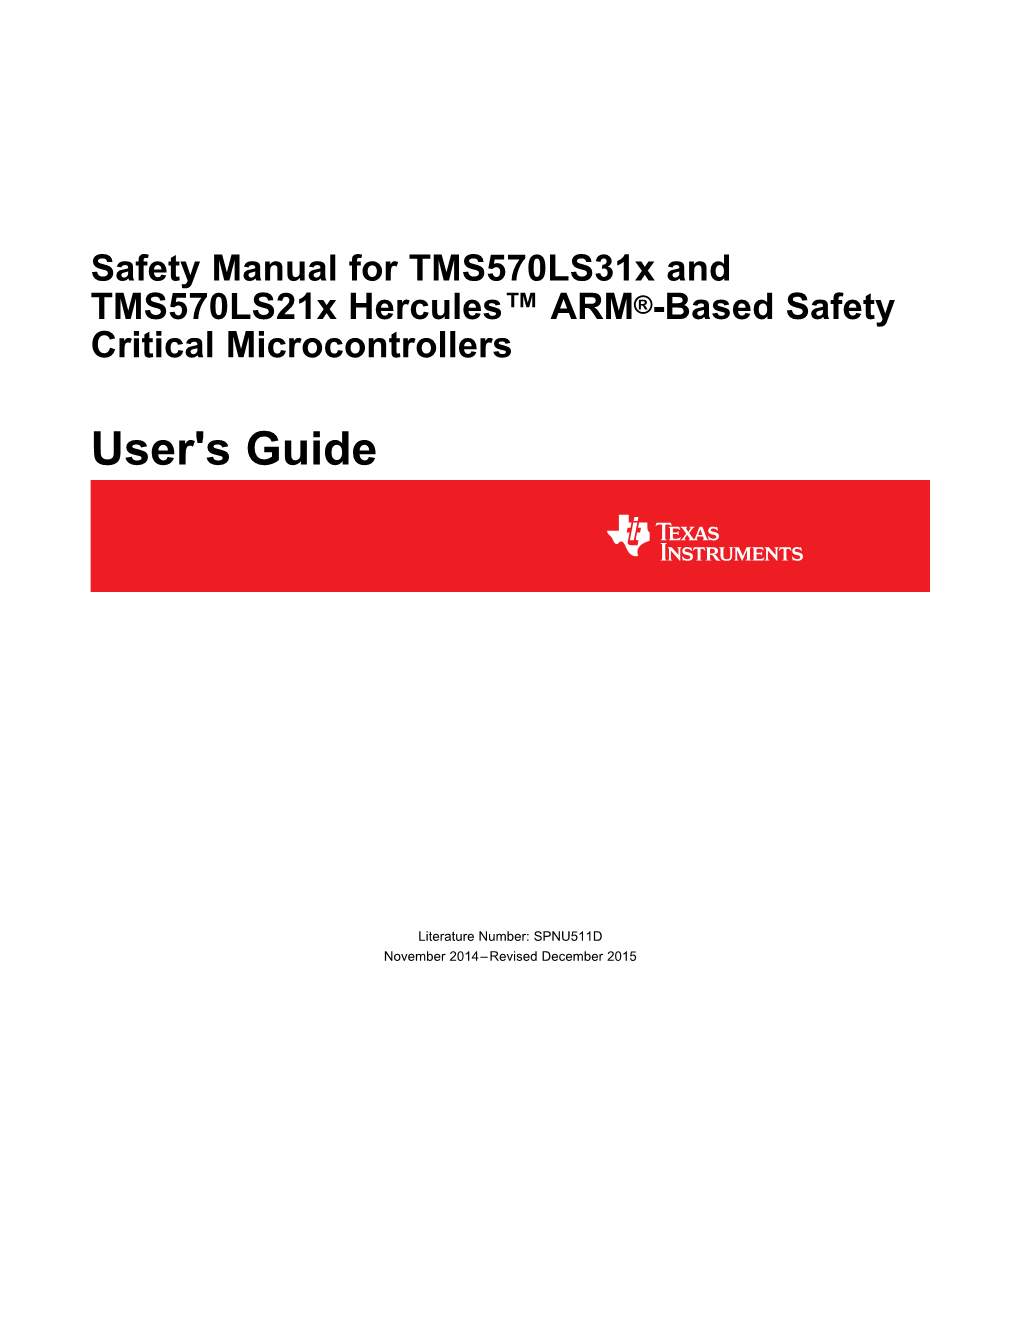 Safety Manual for Tms570ls31x and Tms570ls21x Hercules™ ARM®-Based Safety Critical Microcontrollers